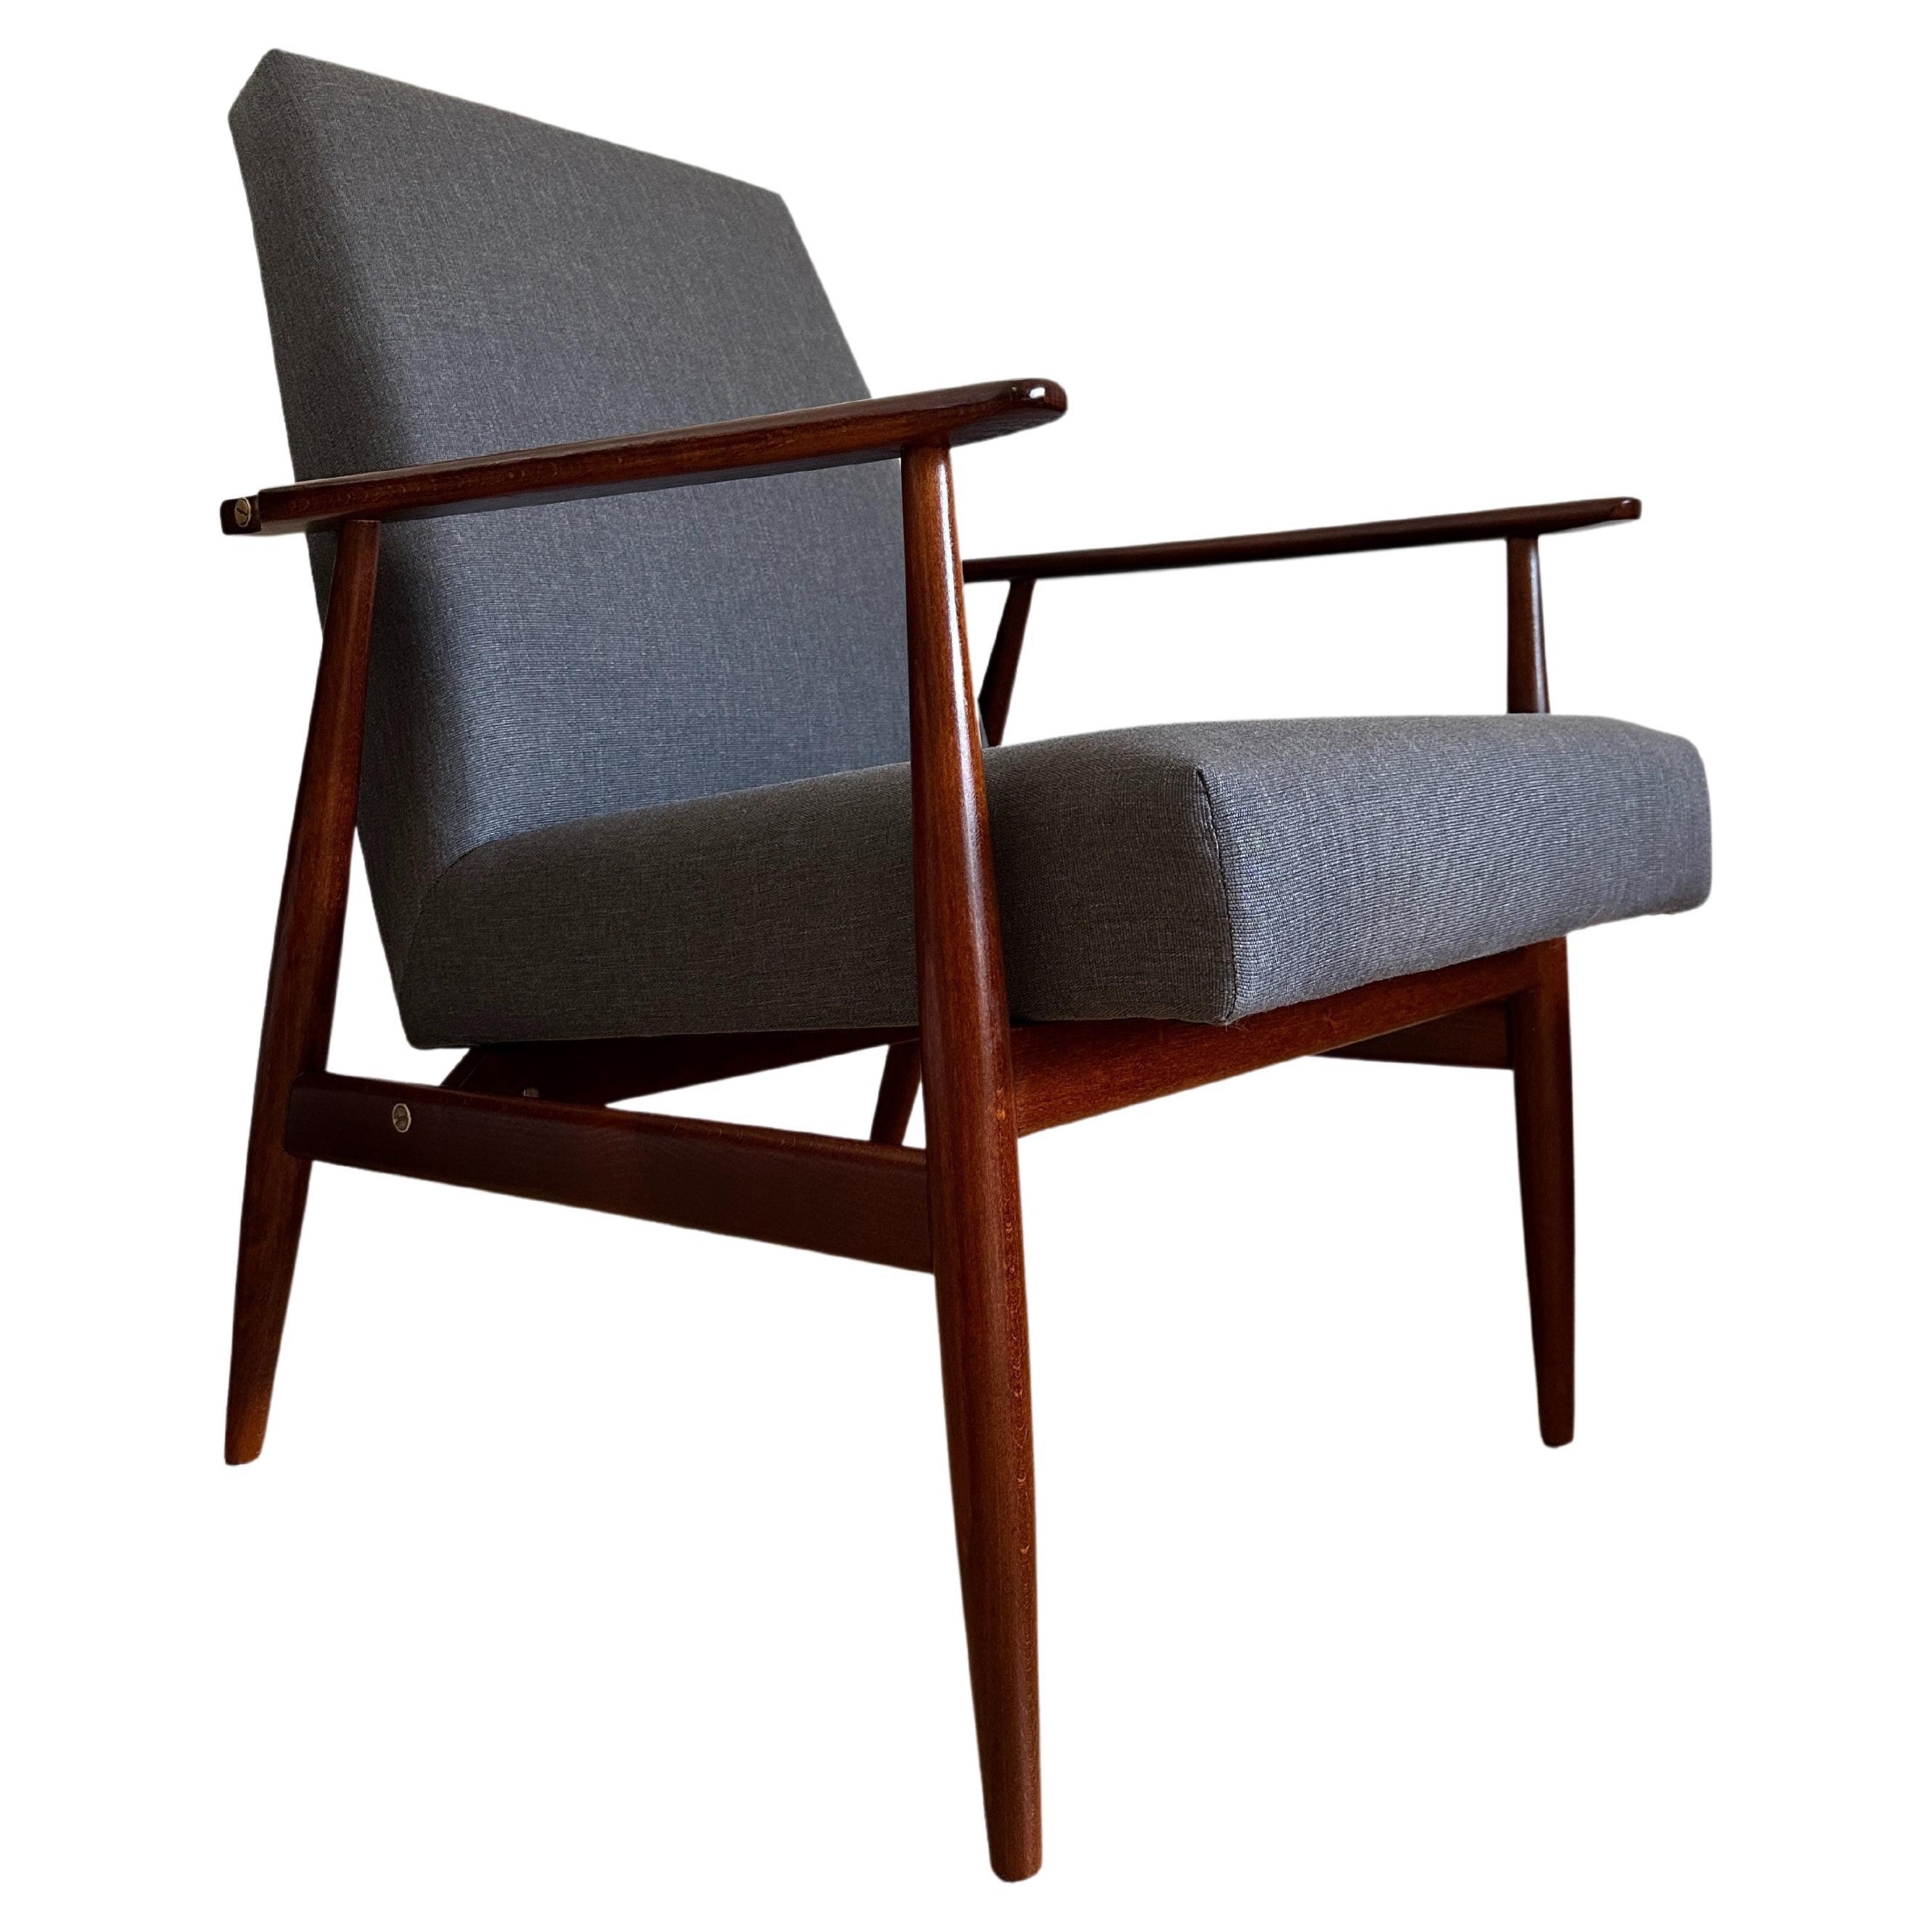 Midcentury Armchair in Kvadrat Upholstery by Henryk Lis, Europe, 1960s For Sale